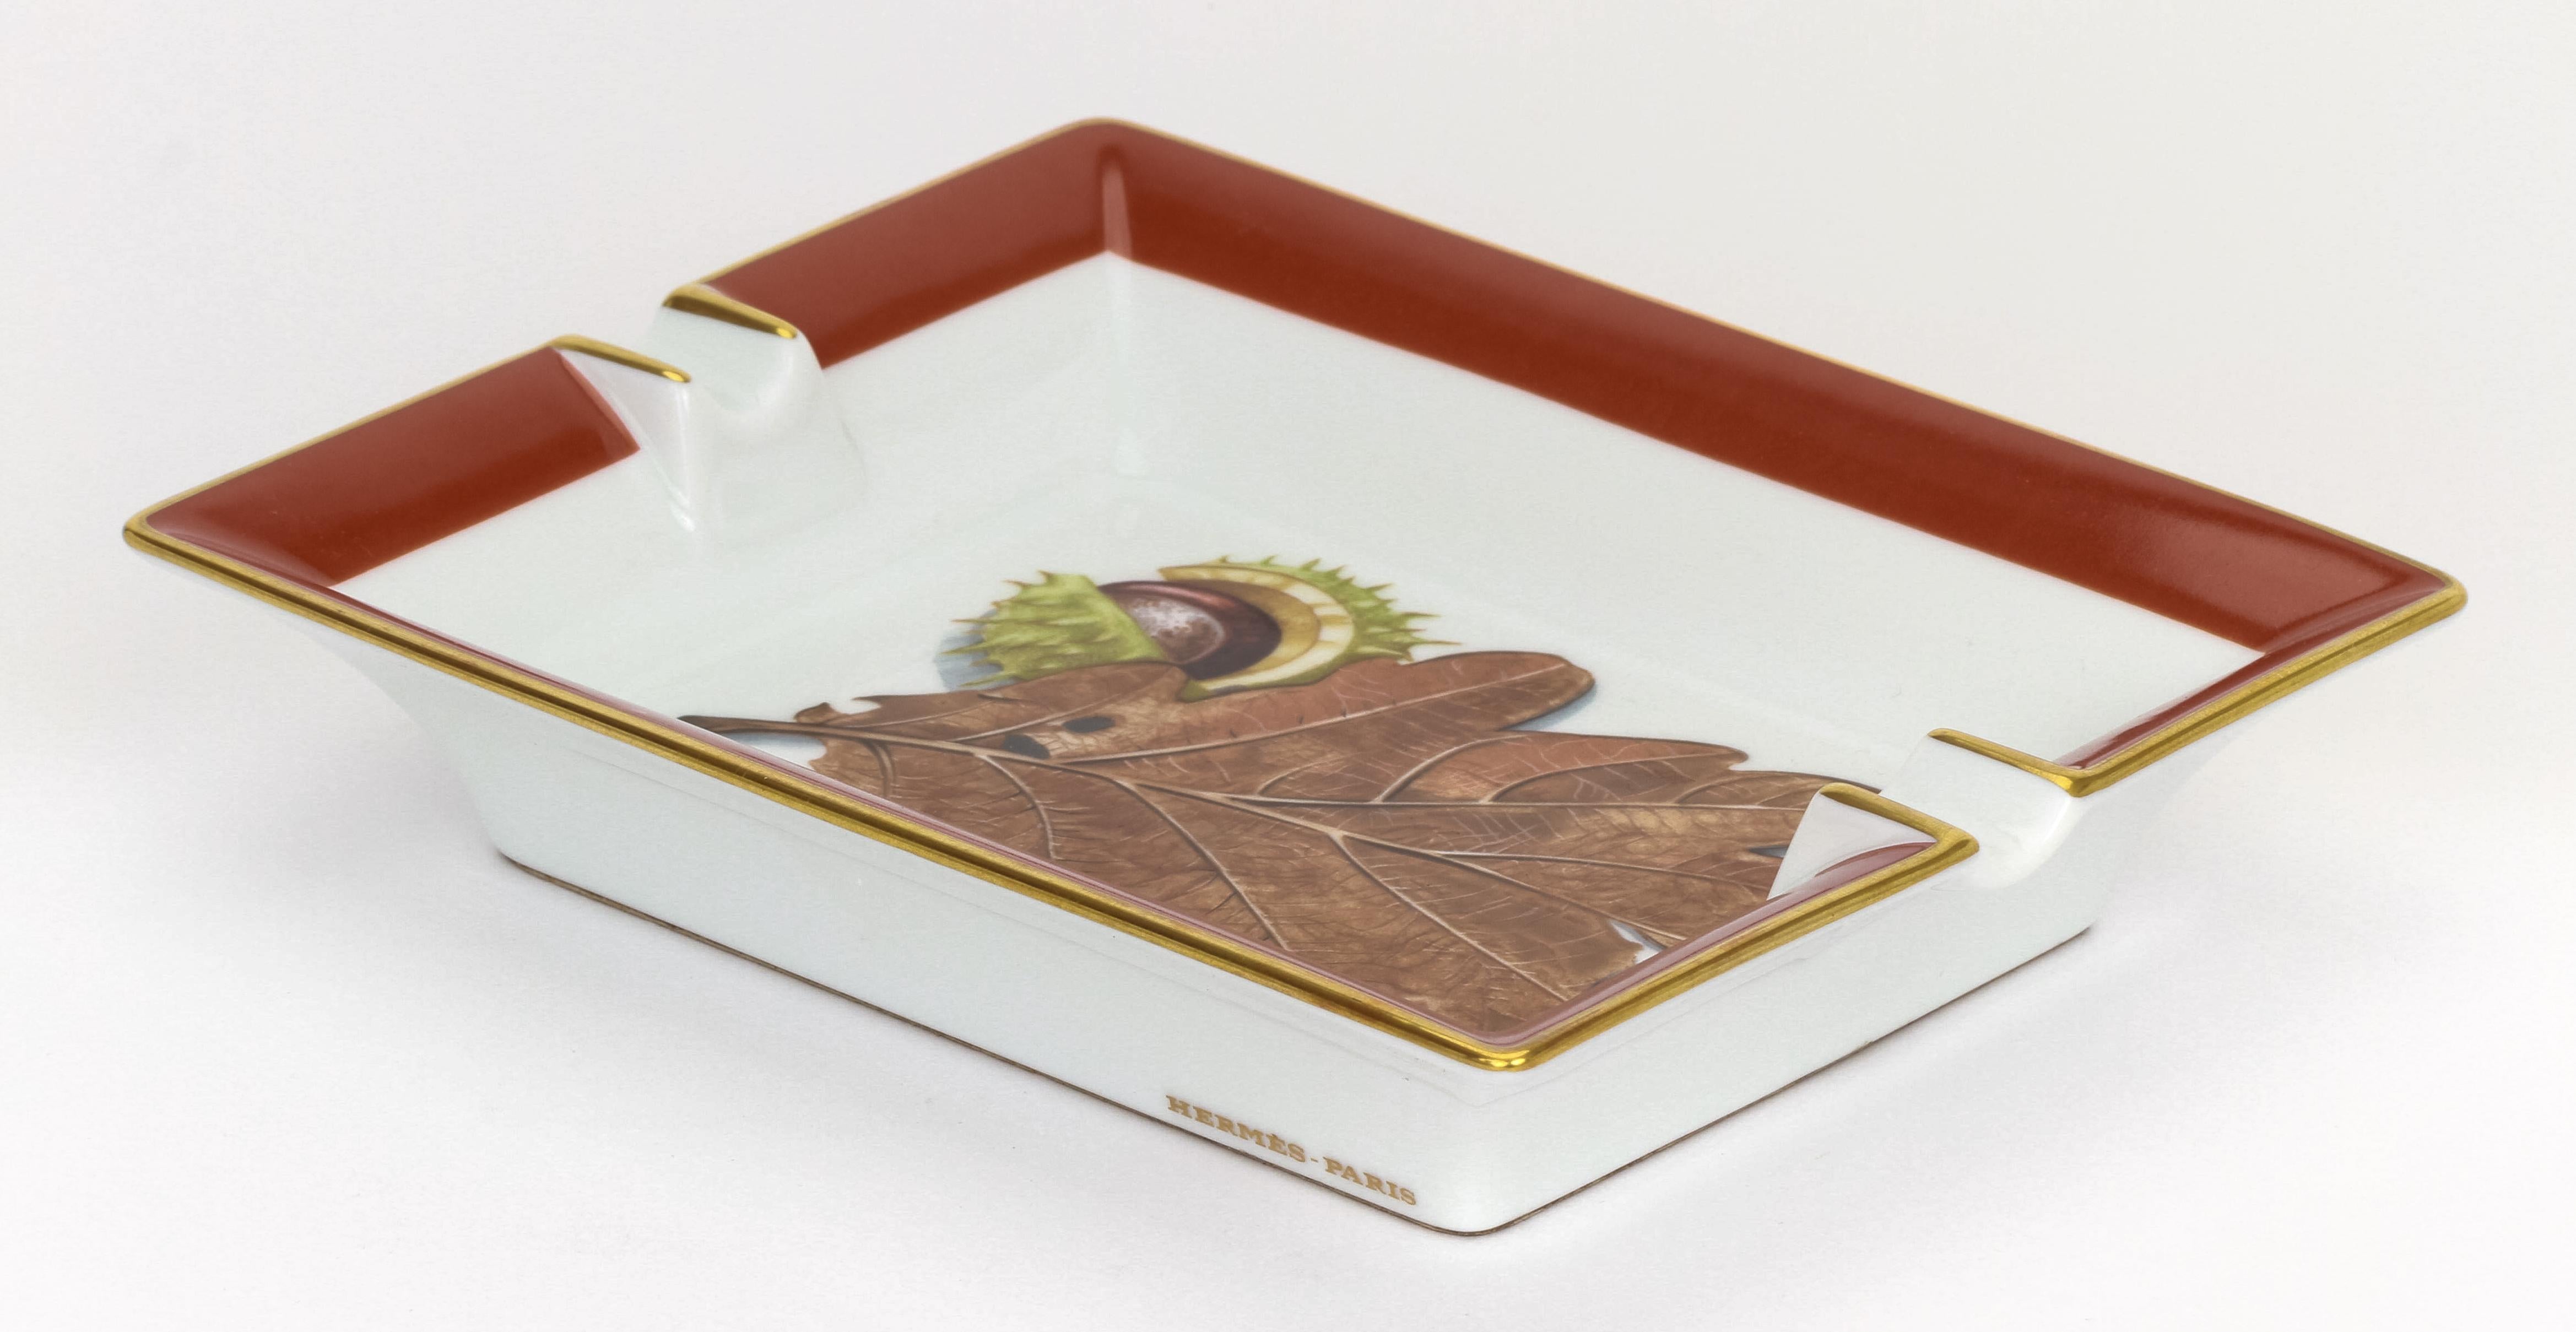 Hermes Porcelain Brown Chestnut Ashtray In Excellent Condition For Sale In West Hollywood, CA